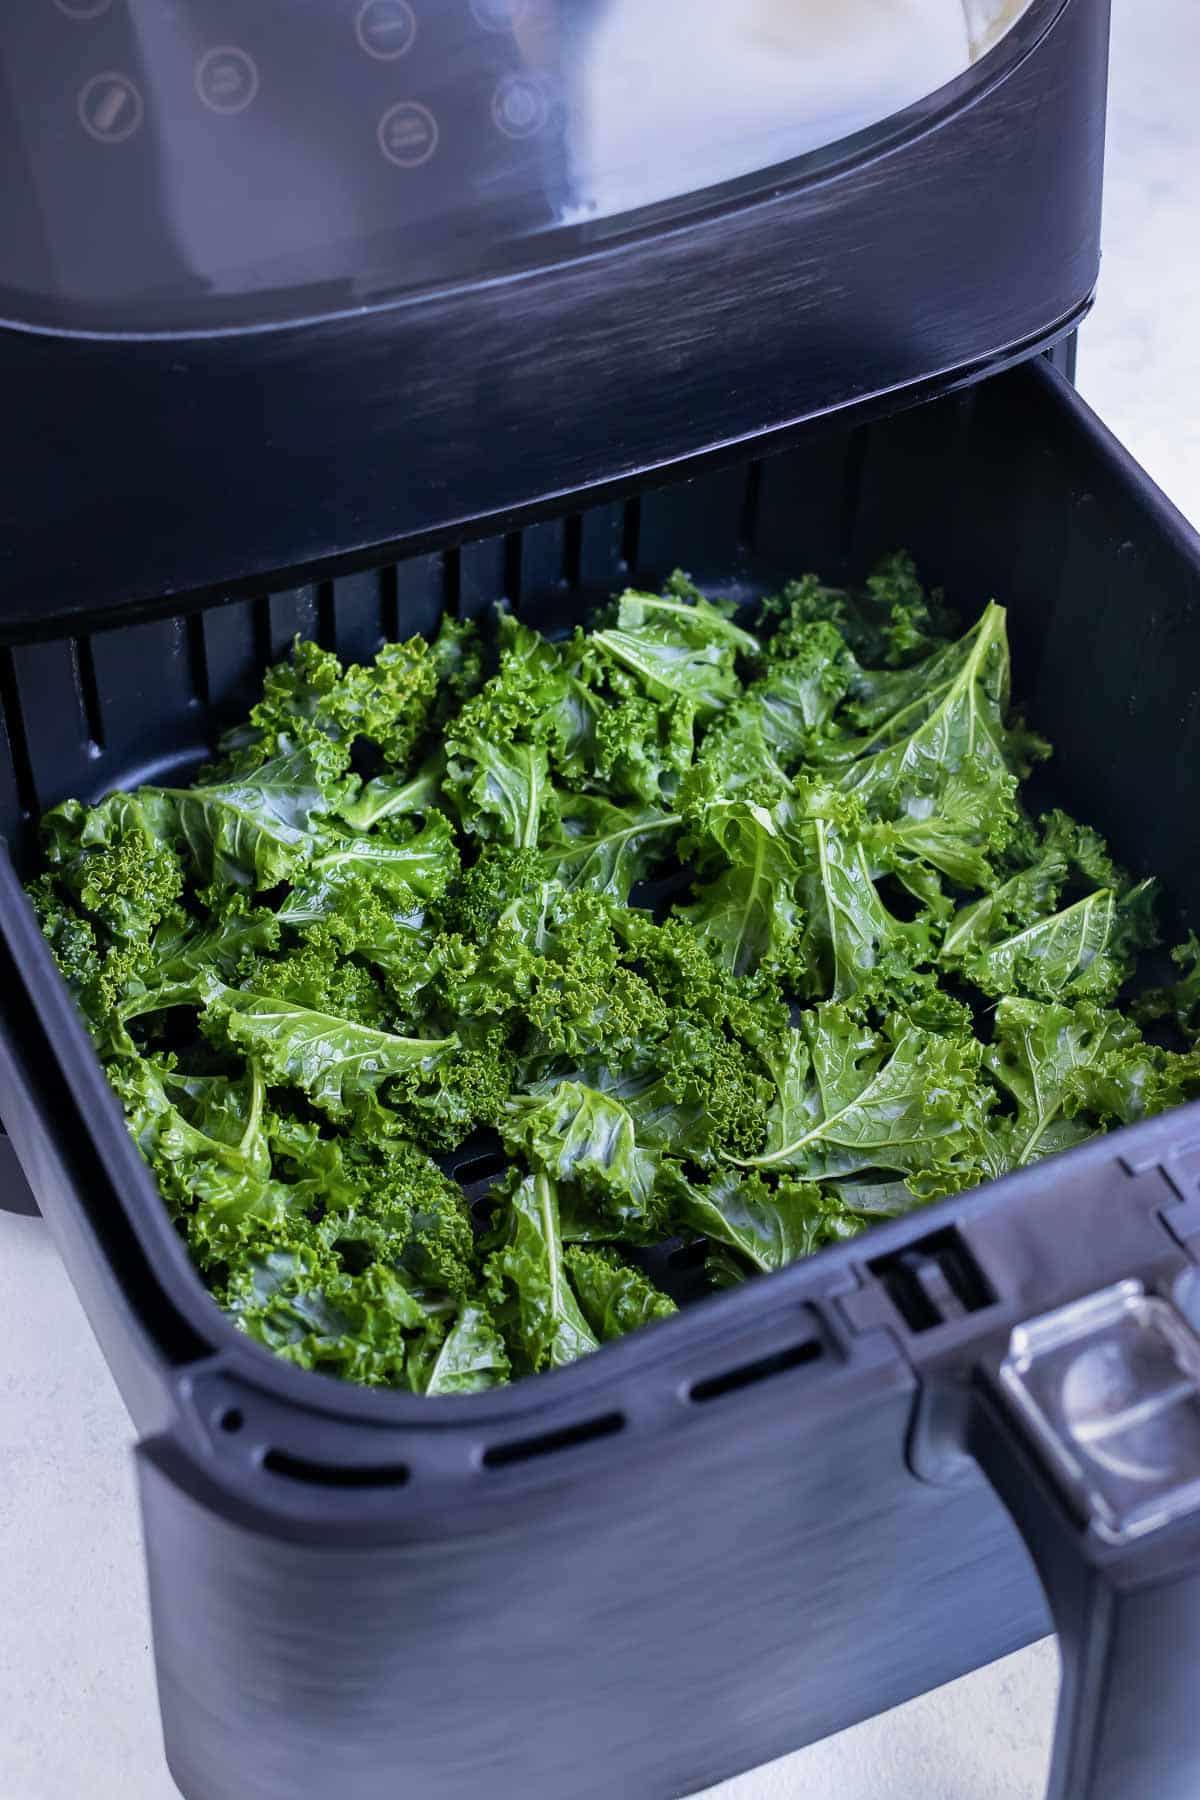 The kale chips are laid flat in one layer in the air fryer.